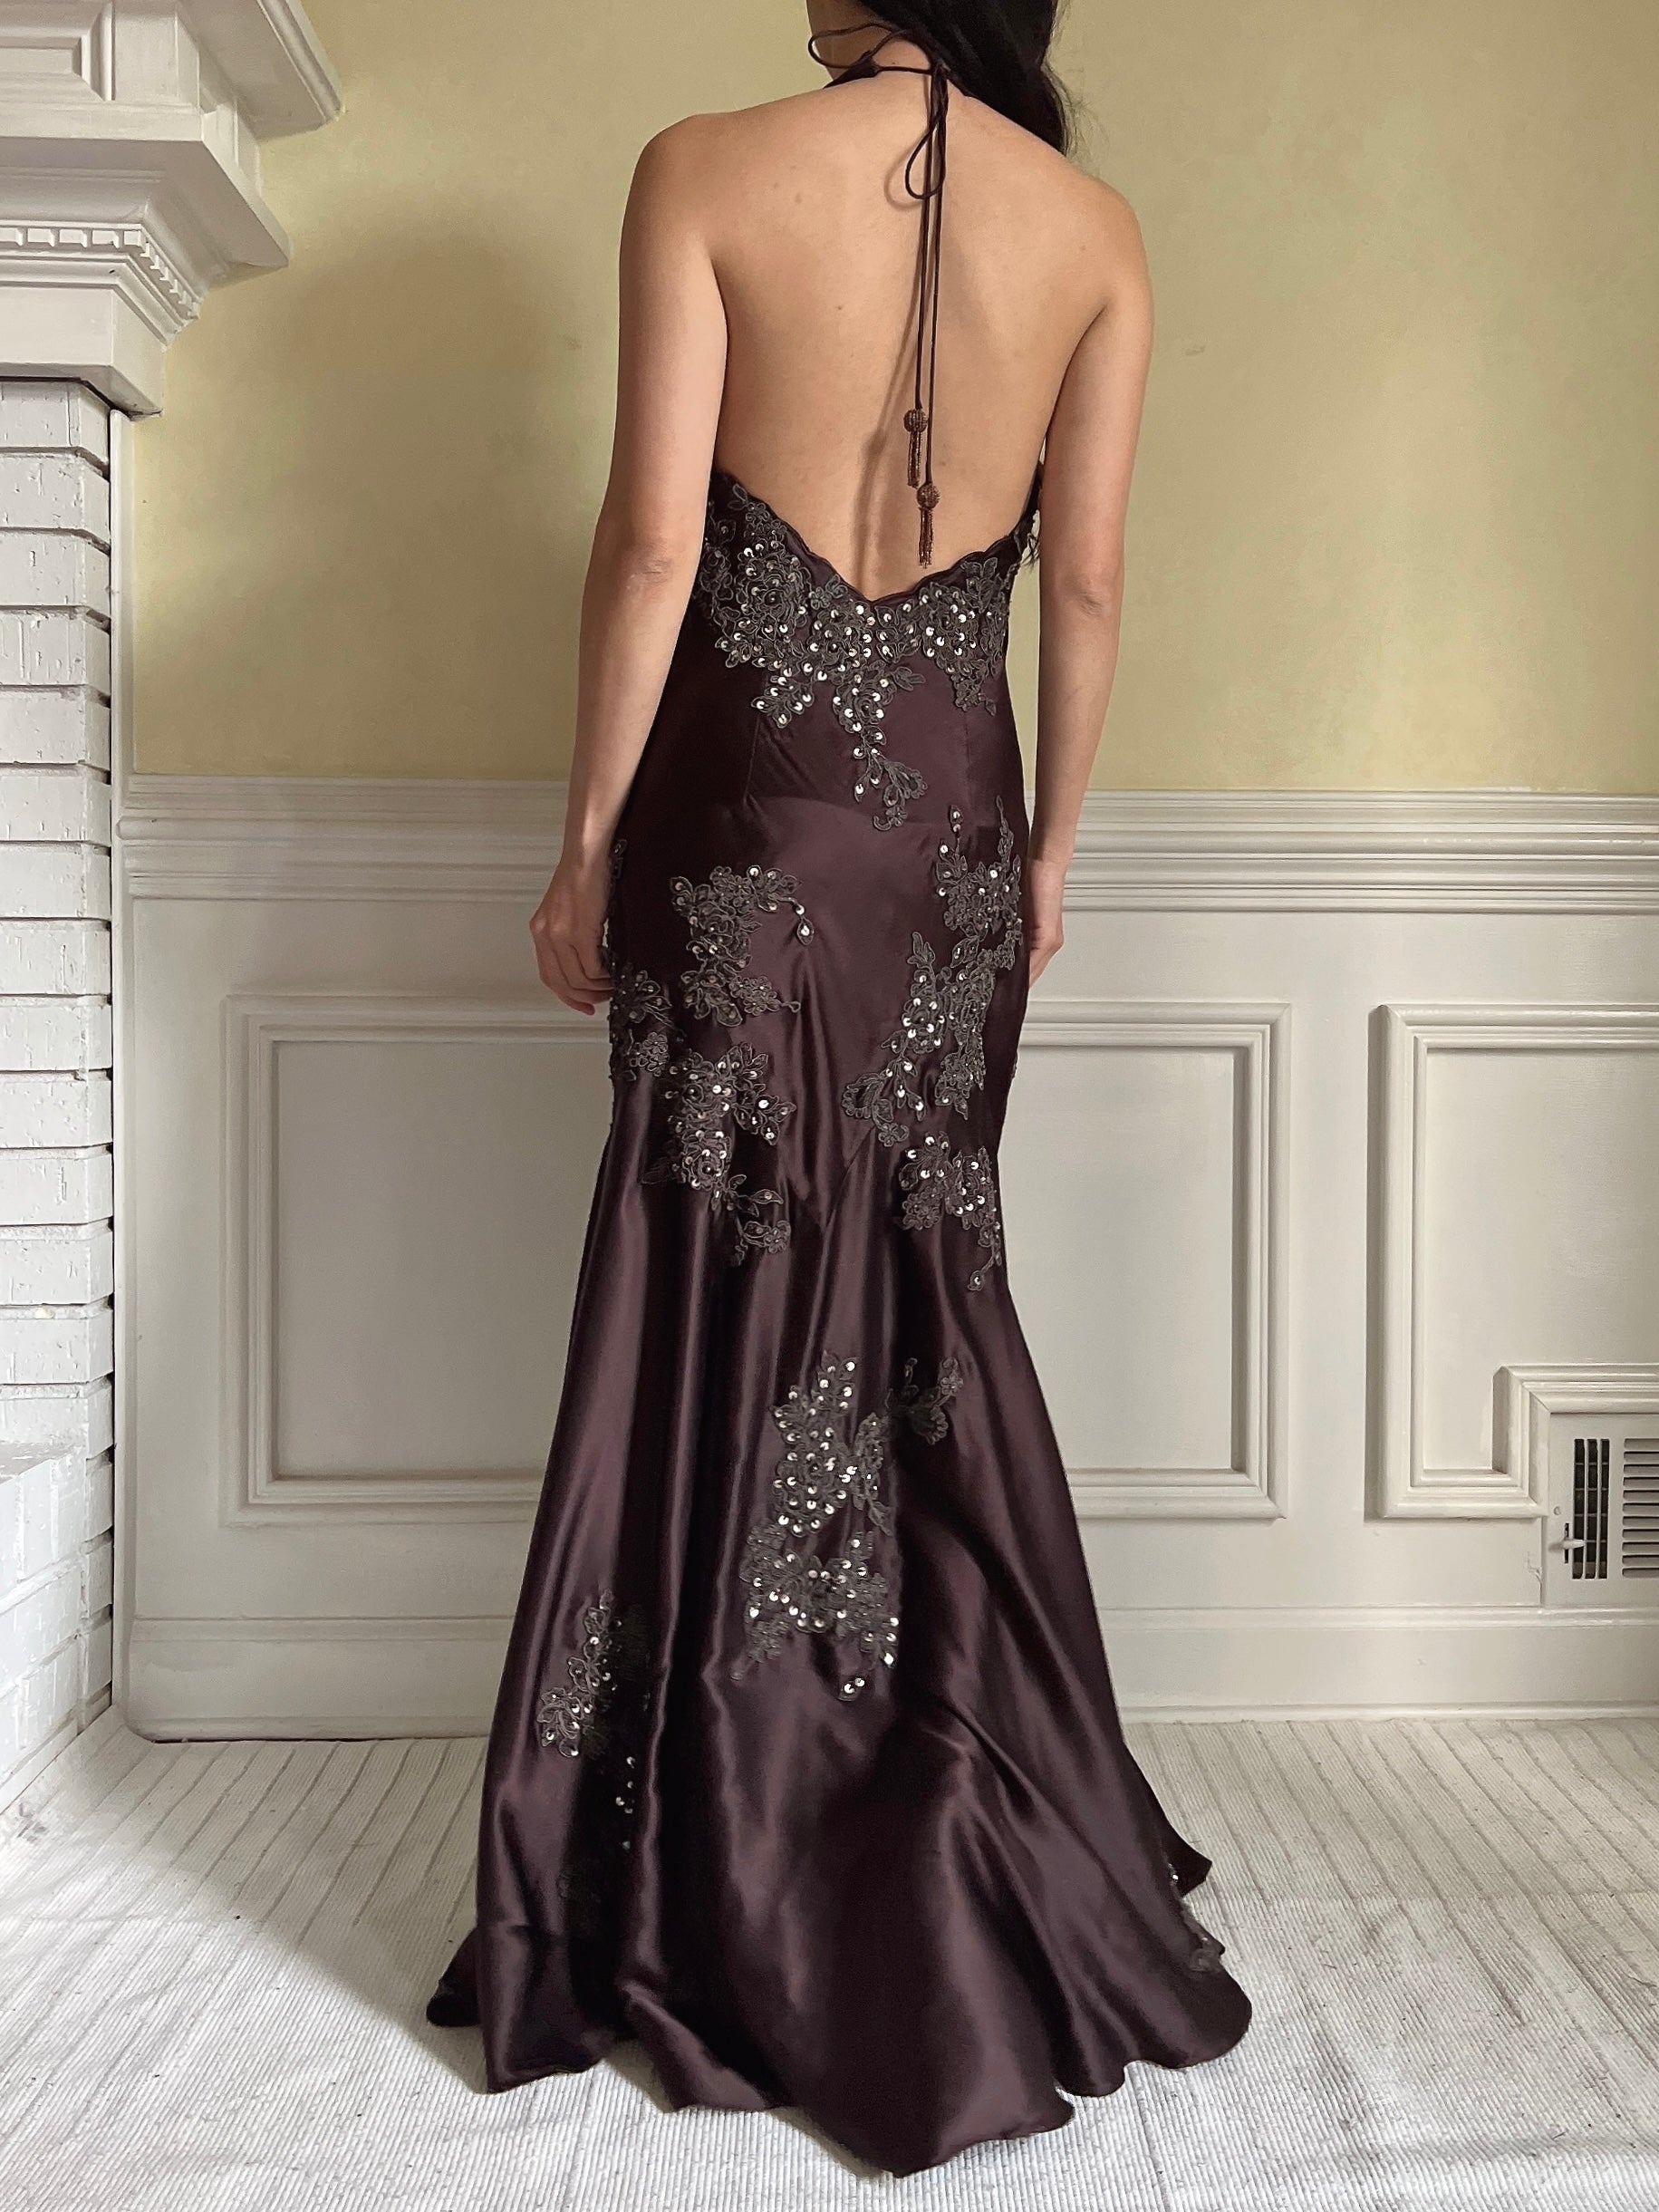 Silk & Lace Beaded Gown - Giftables